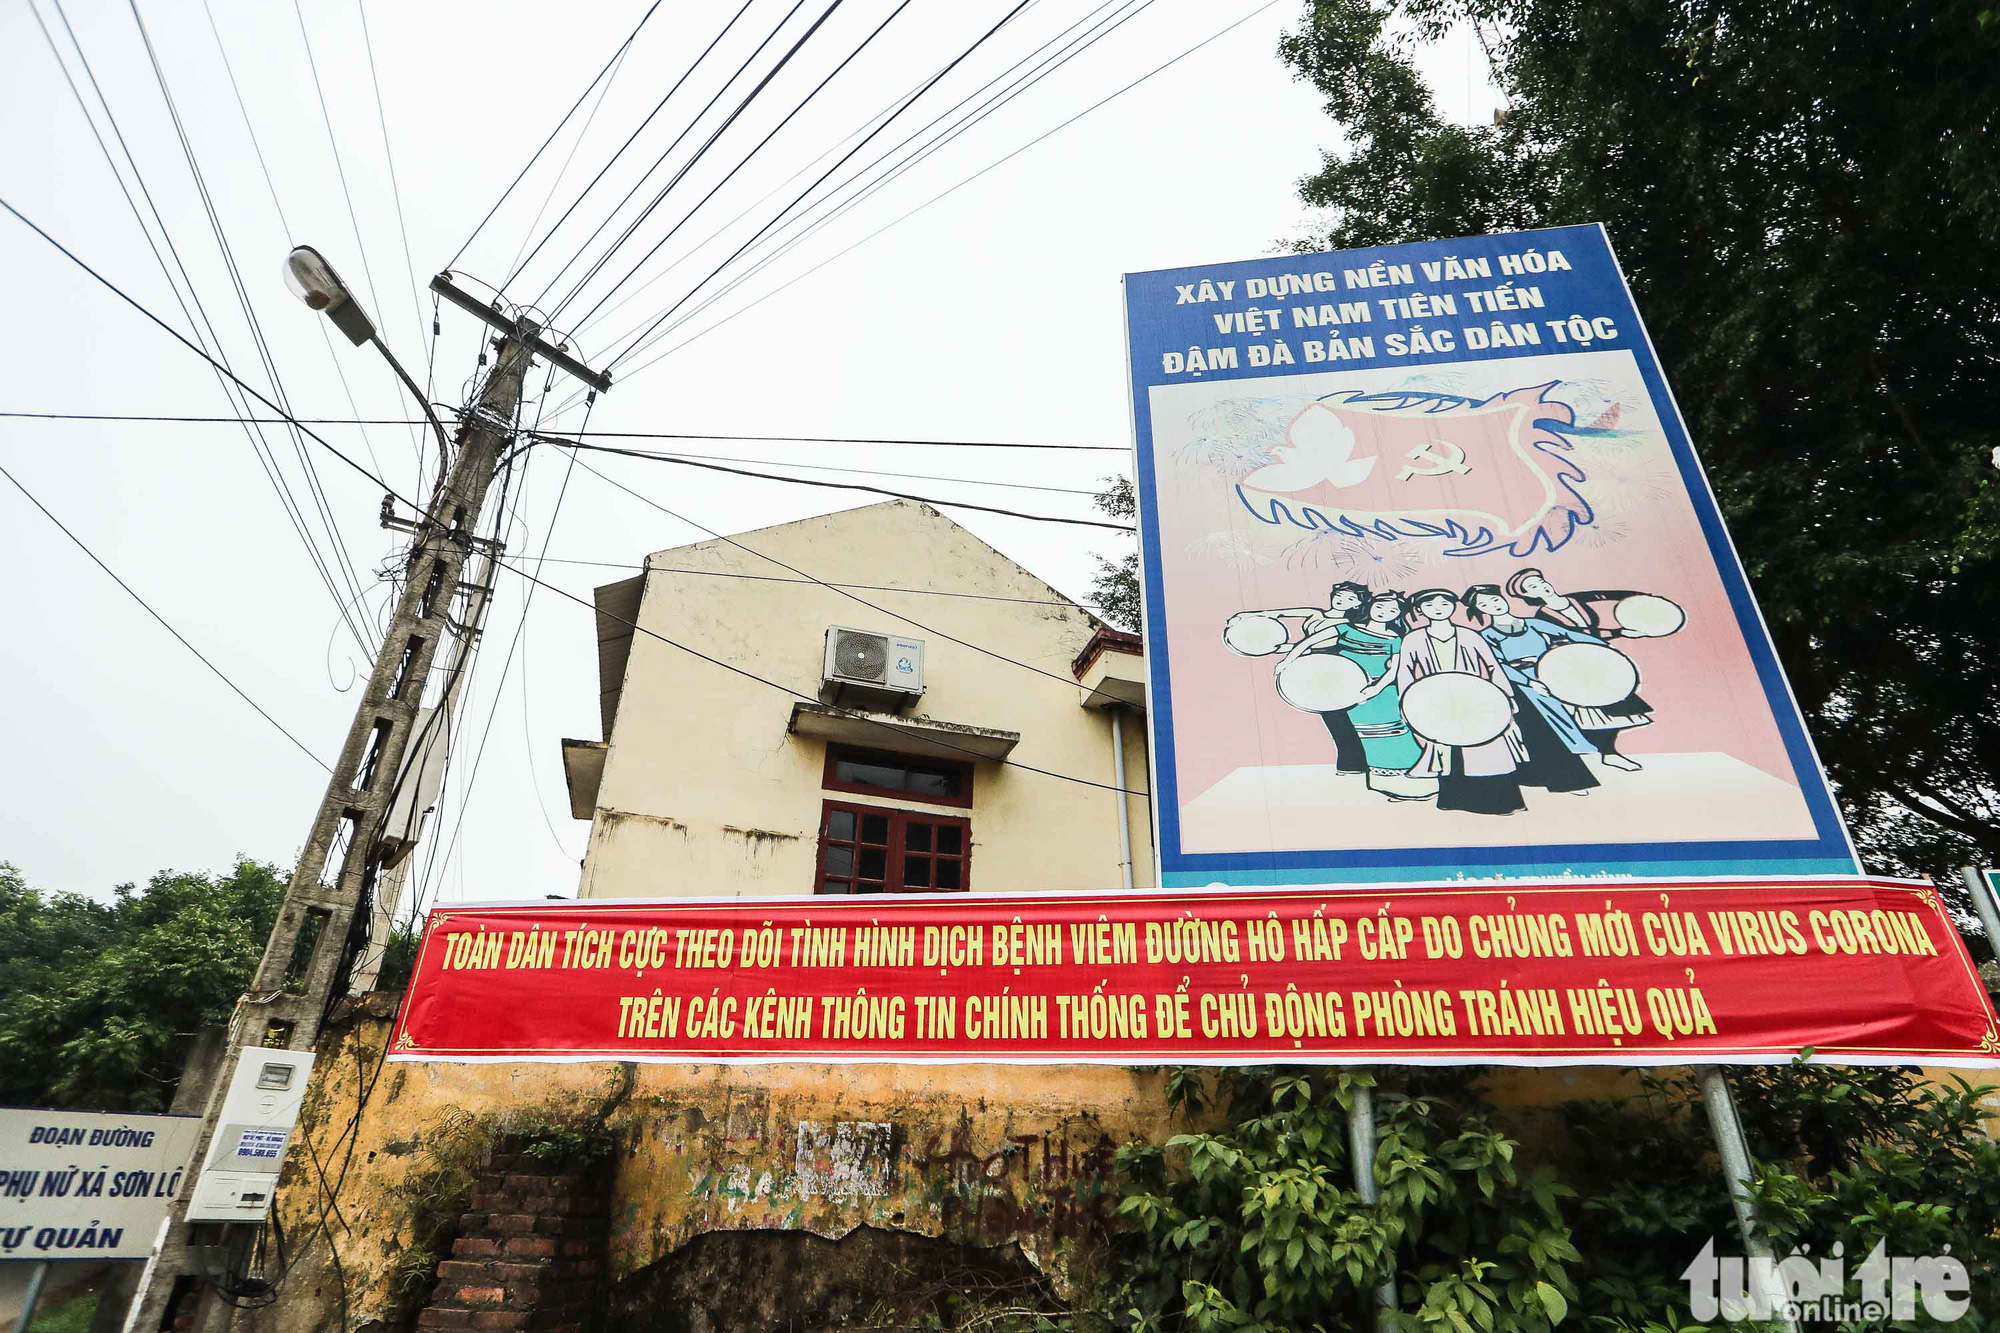 A banner with a slogan on COVID-19 prevention is hung in Ai Van village in Son Loi Commune, Binh Xuyen District, Vinh Phuc Province, Vietnam in this photo taken on February 11, 2020. Photo: Nguyen Khanh / Tuoi Tre